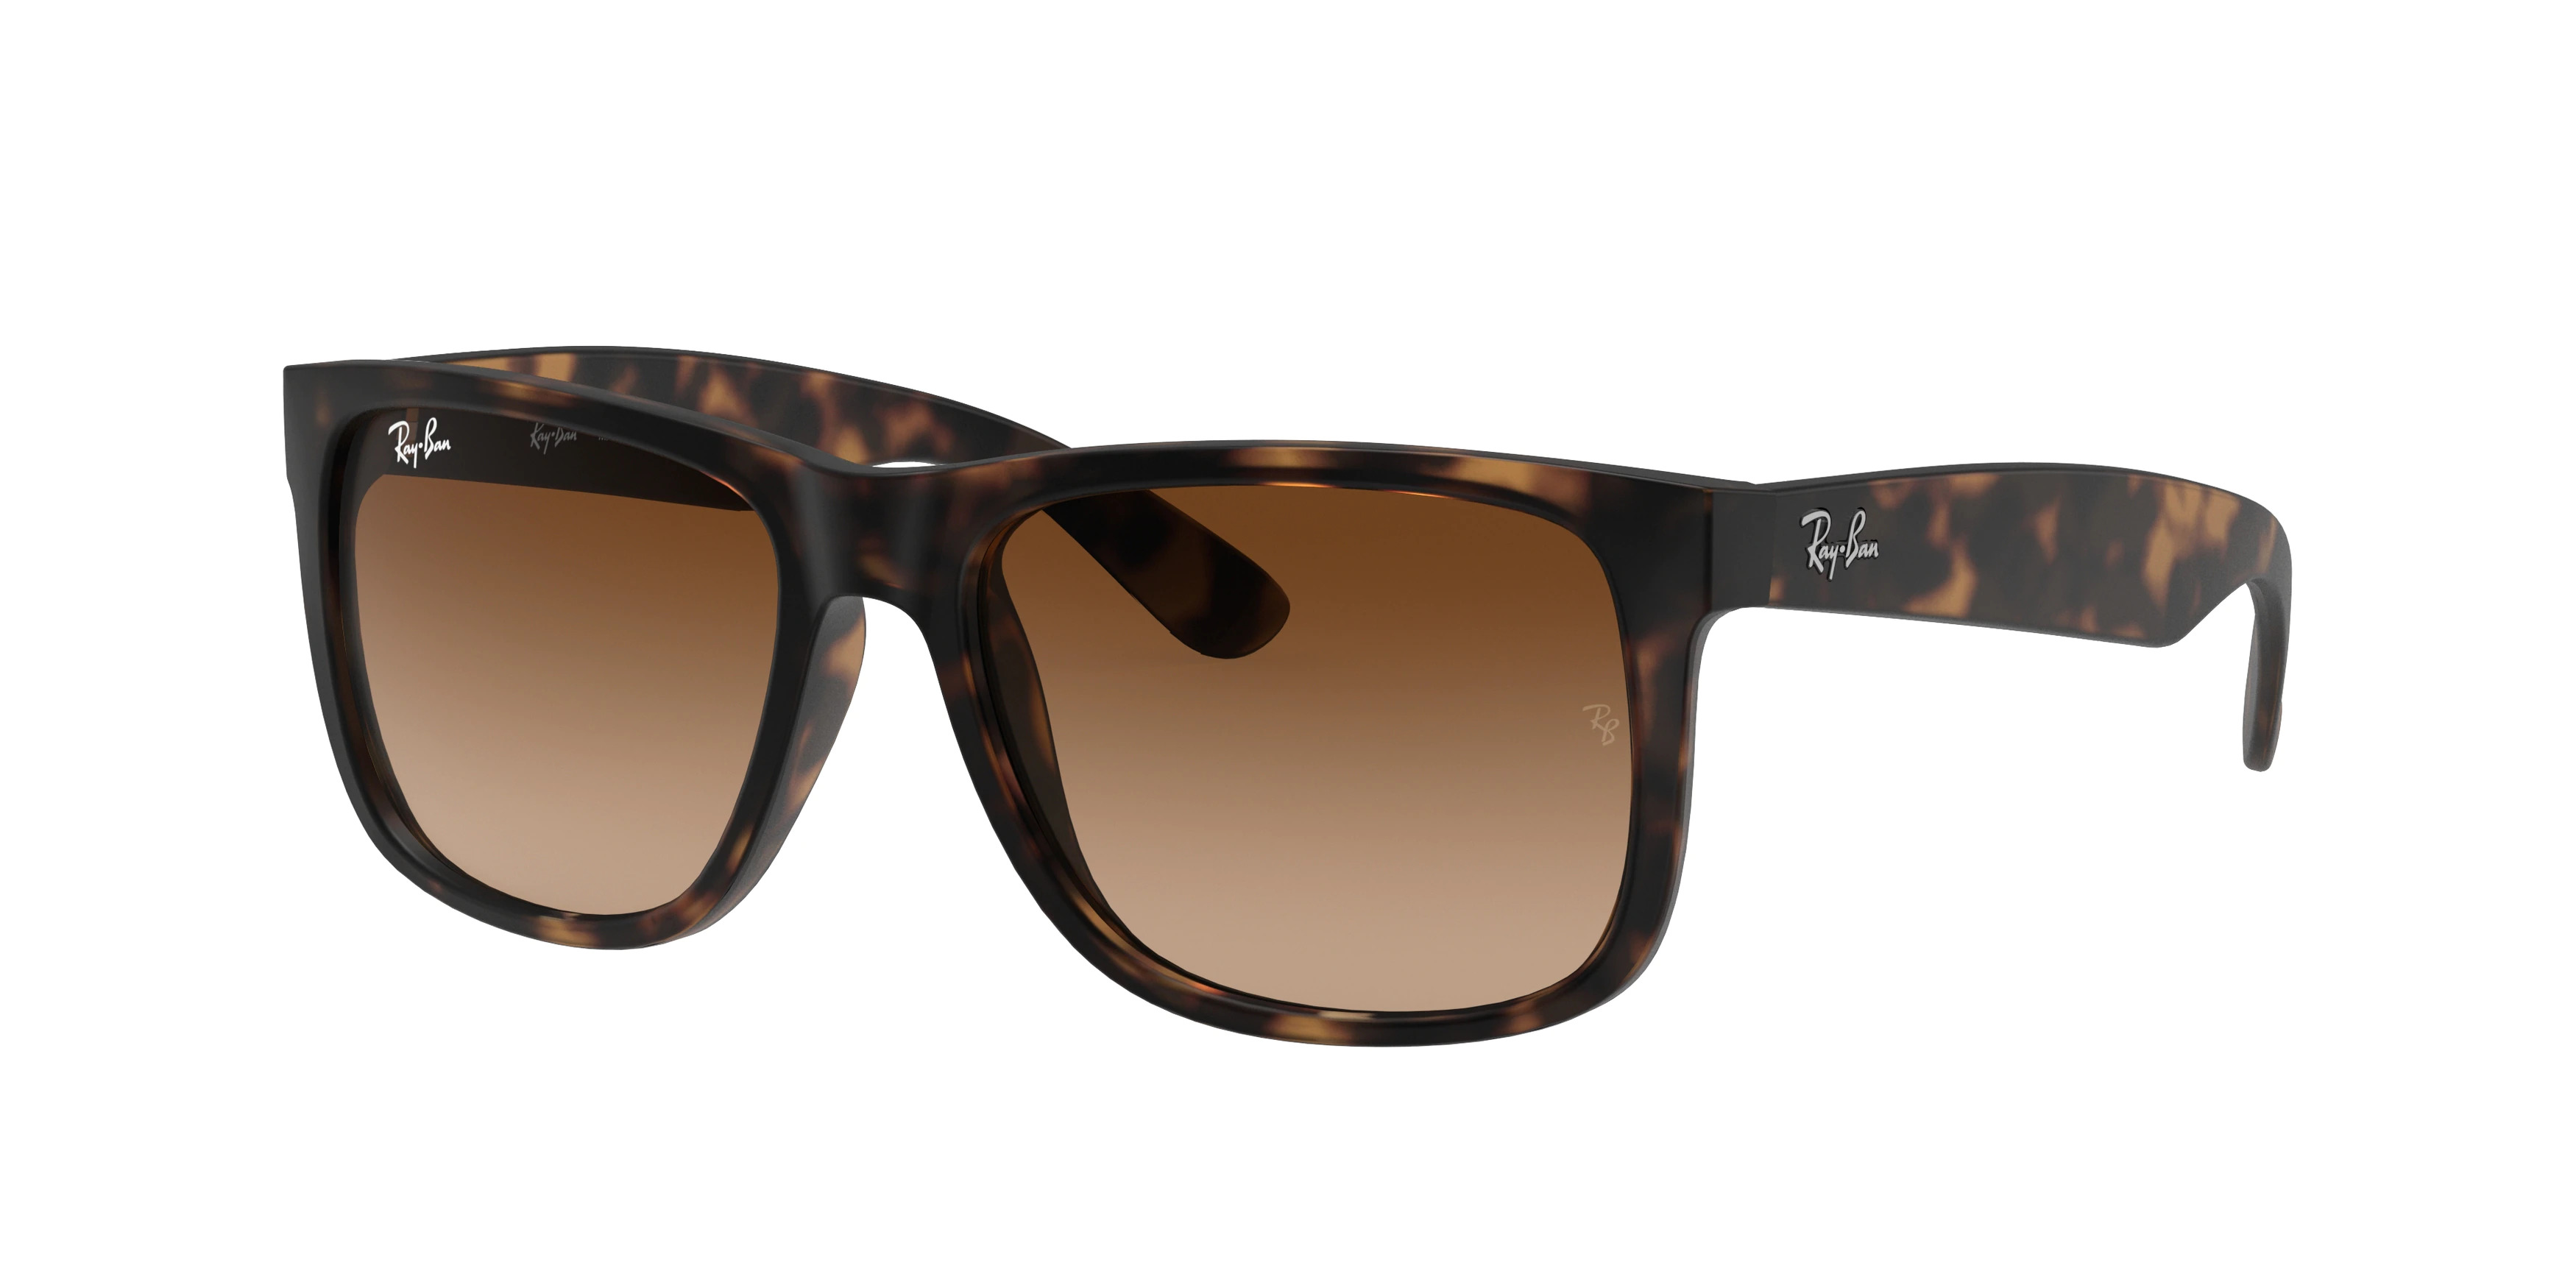 Ray-ban Justin RB4165 710/13 Tortoise (Brown Gradient)